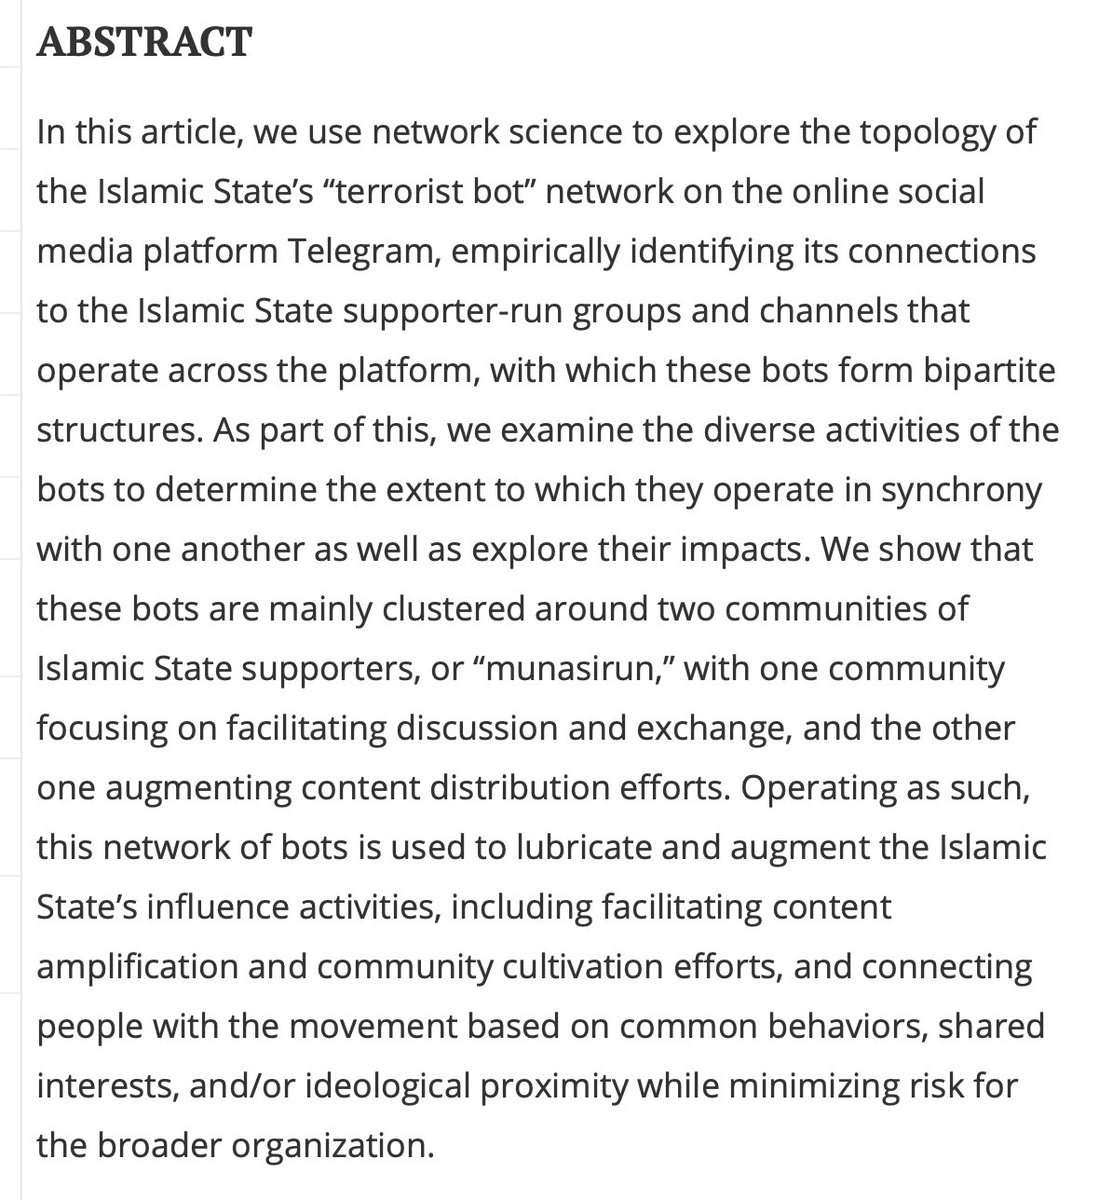 New article in @terpolv from @Ex_Trac cofounders Abdullah Alrhmoun and @charliewinter, writing with @janos_kertesz: Using network science to explore the role of bots in terrorist communities. tandfonline.com/doi/full/10.10…